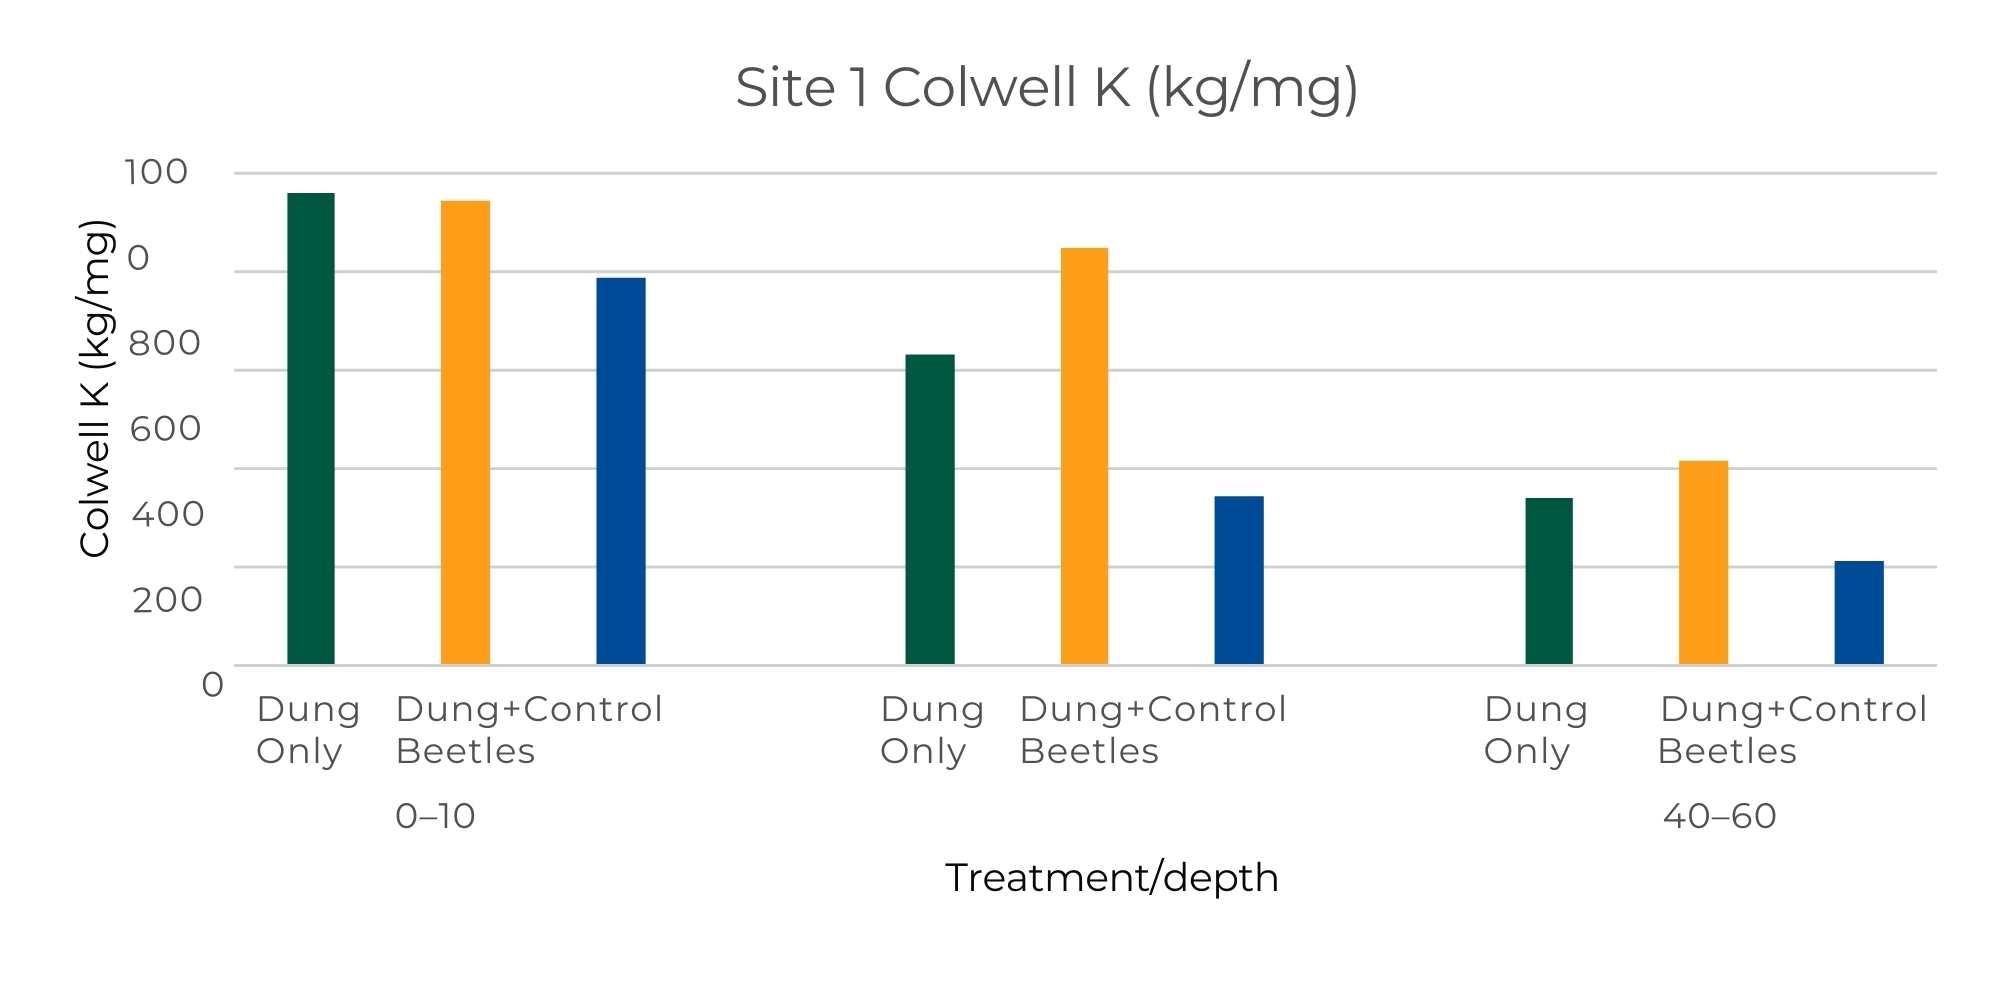 Dung Only, Dung+Beetle and Control Colwell Potassium June 2021 – 1 year after burial